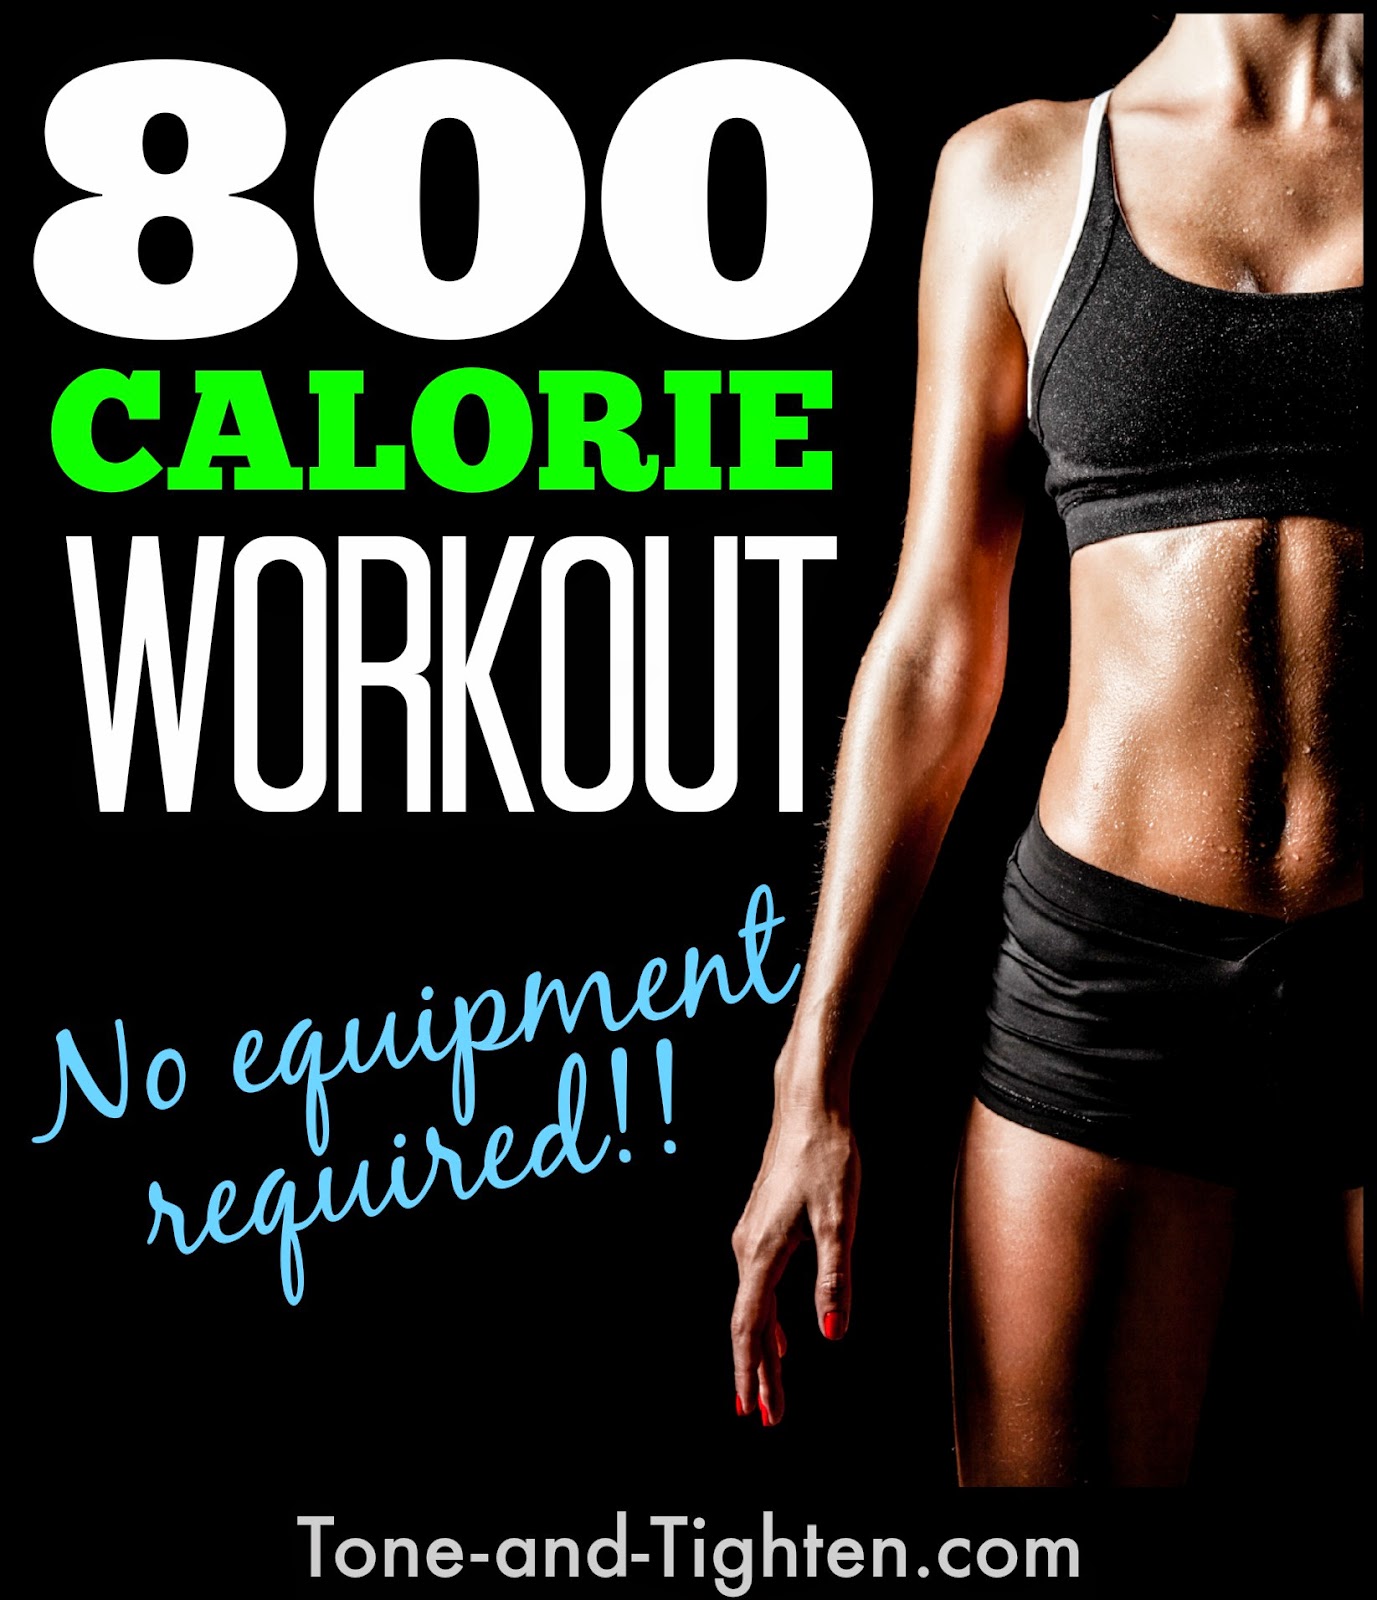 The 800 Calorie Burn Workout – No equipment needed!